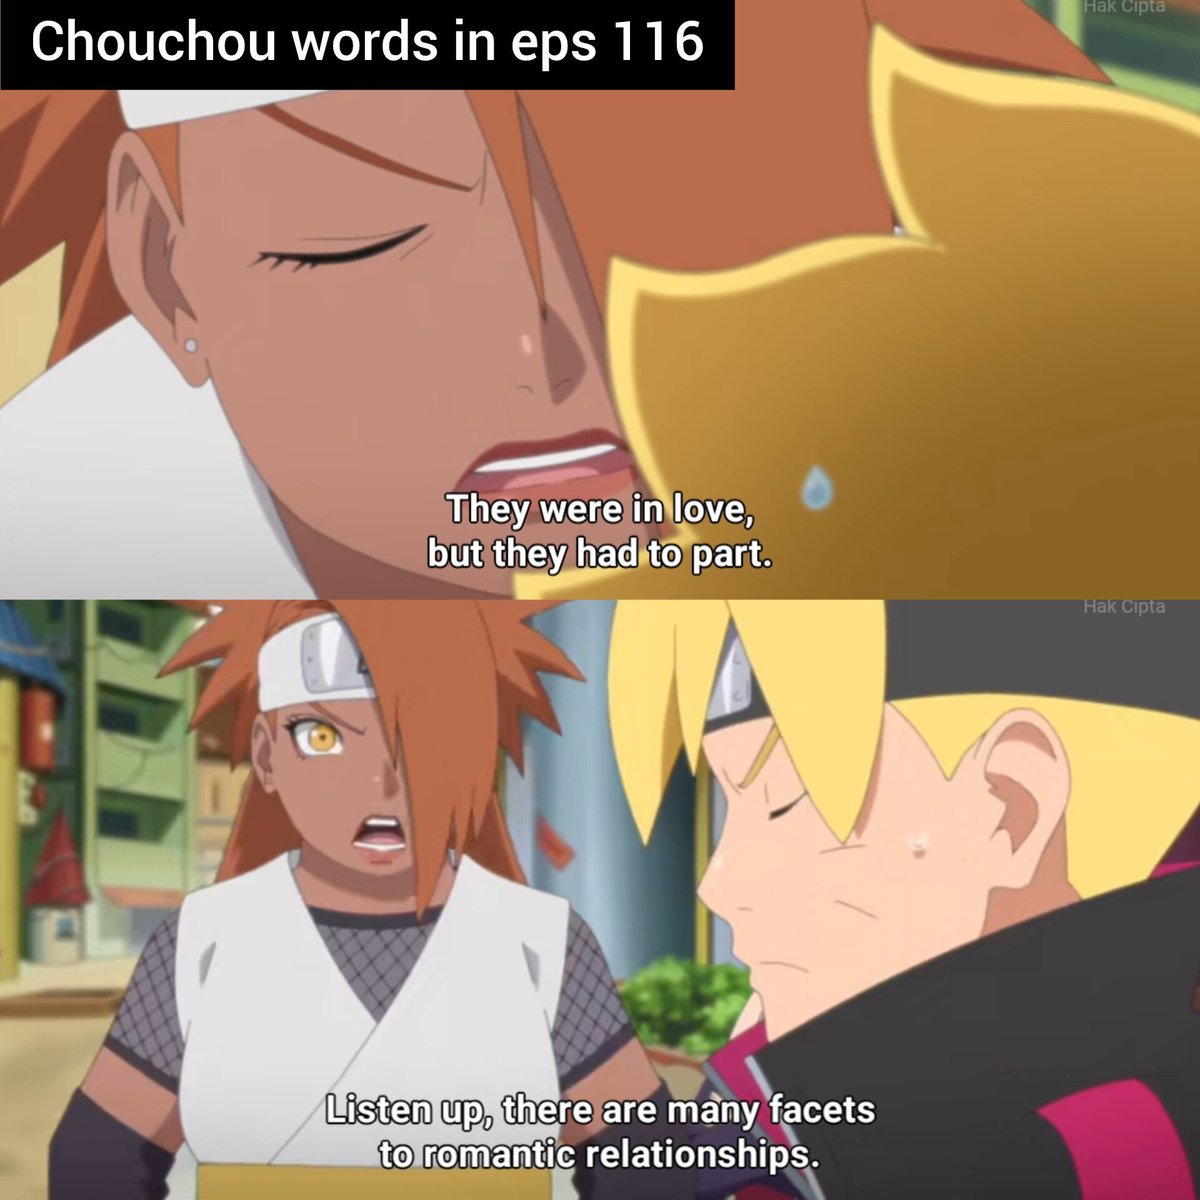 Chouchou once said 'They were in love, but they had to part.' - 'Listen up, there are many facets to romantic relationships.'

#BoruSara #boruto #sarada